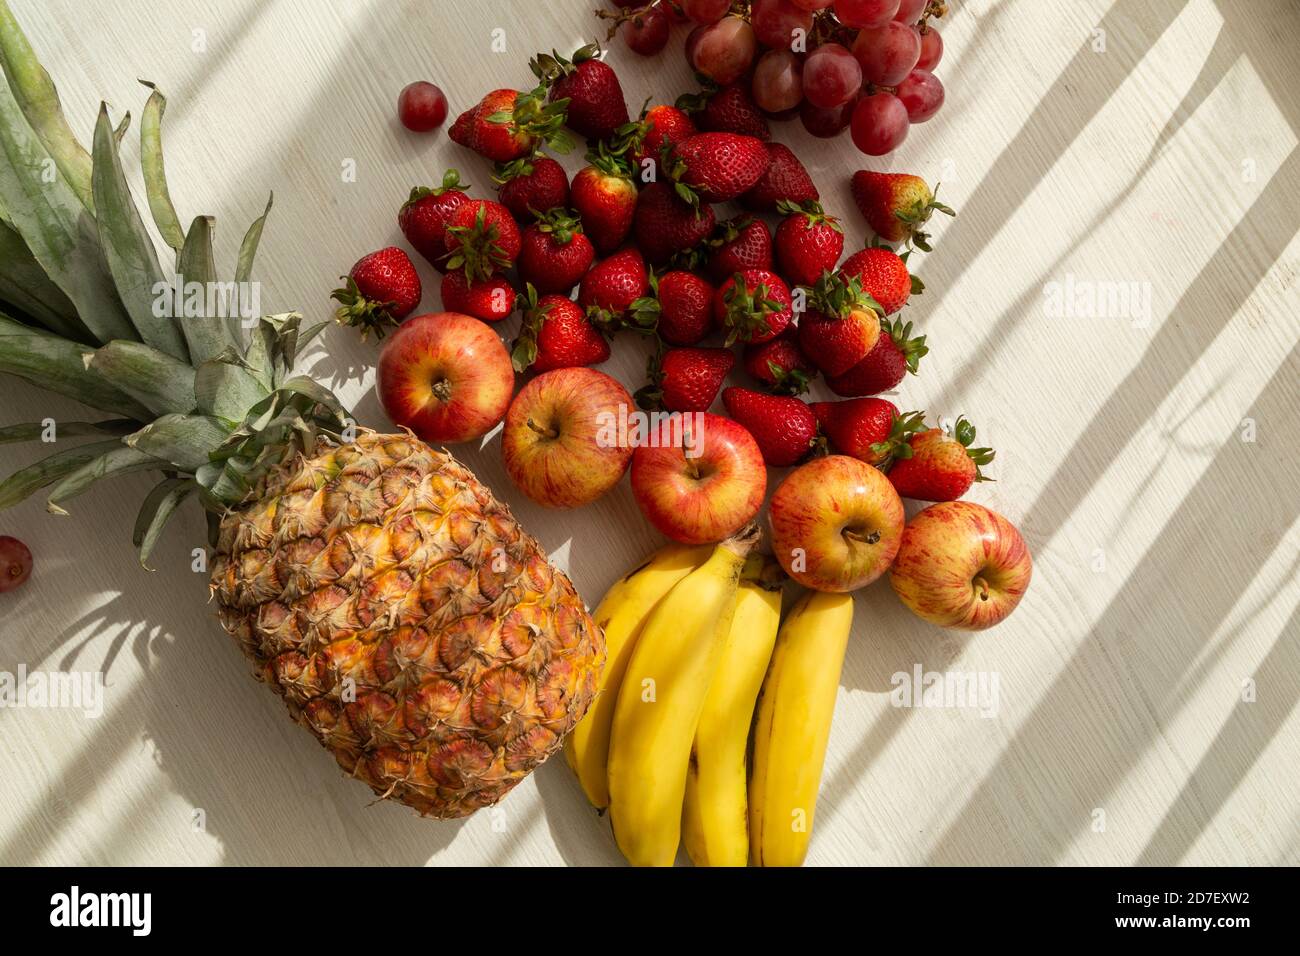 Delicious Fresh Fruits With Shadow Pineapple Bananas Apple